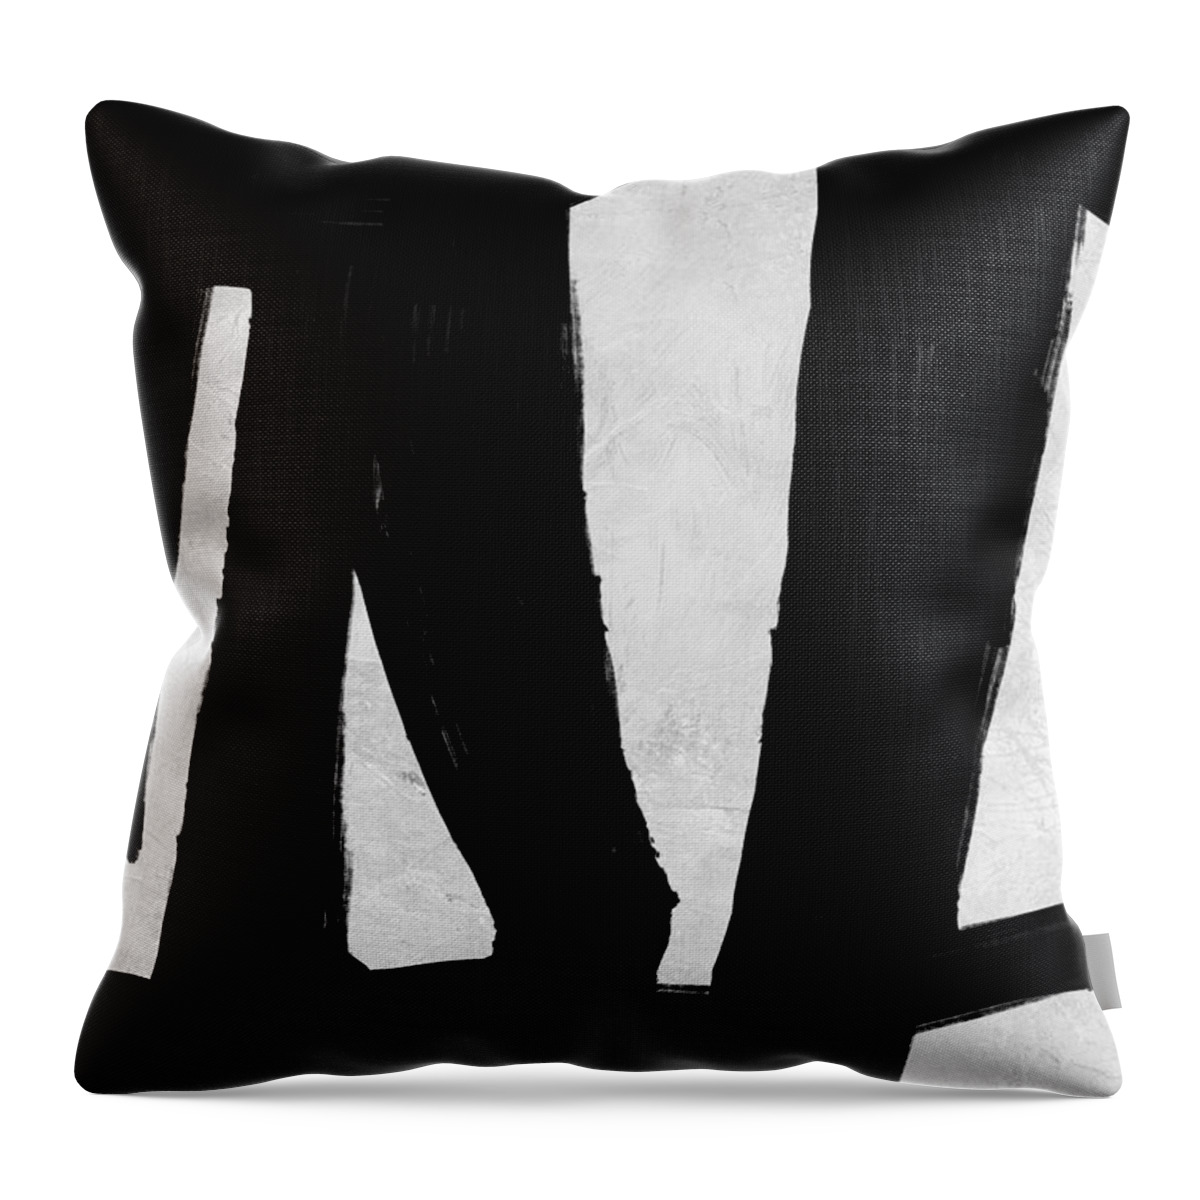 Black And White Throw Pillow featuring the mixed media Abstract Black and White No.22 by Naxart Studio